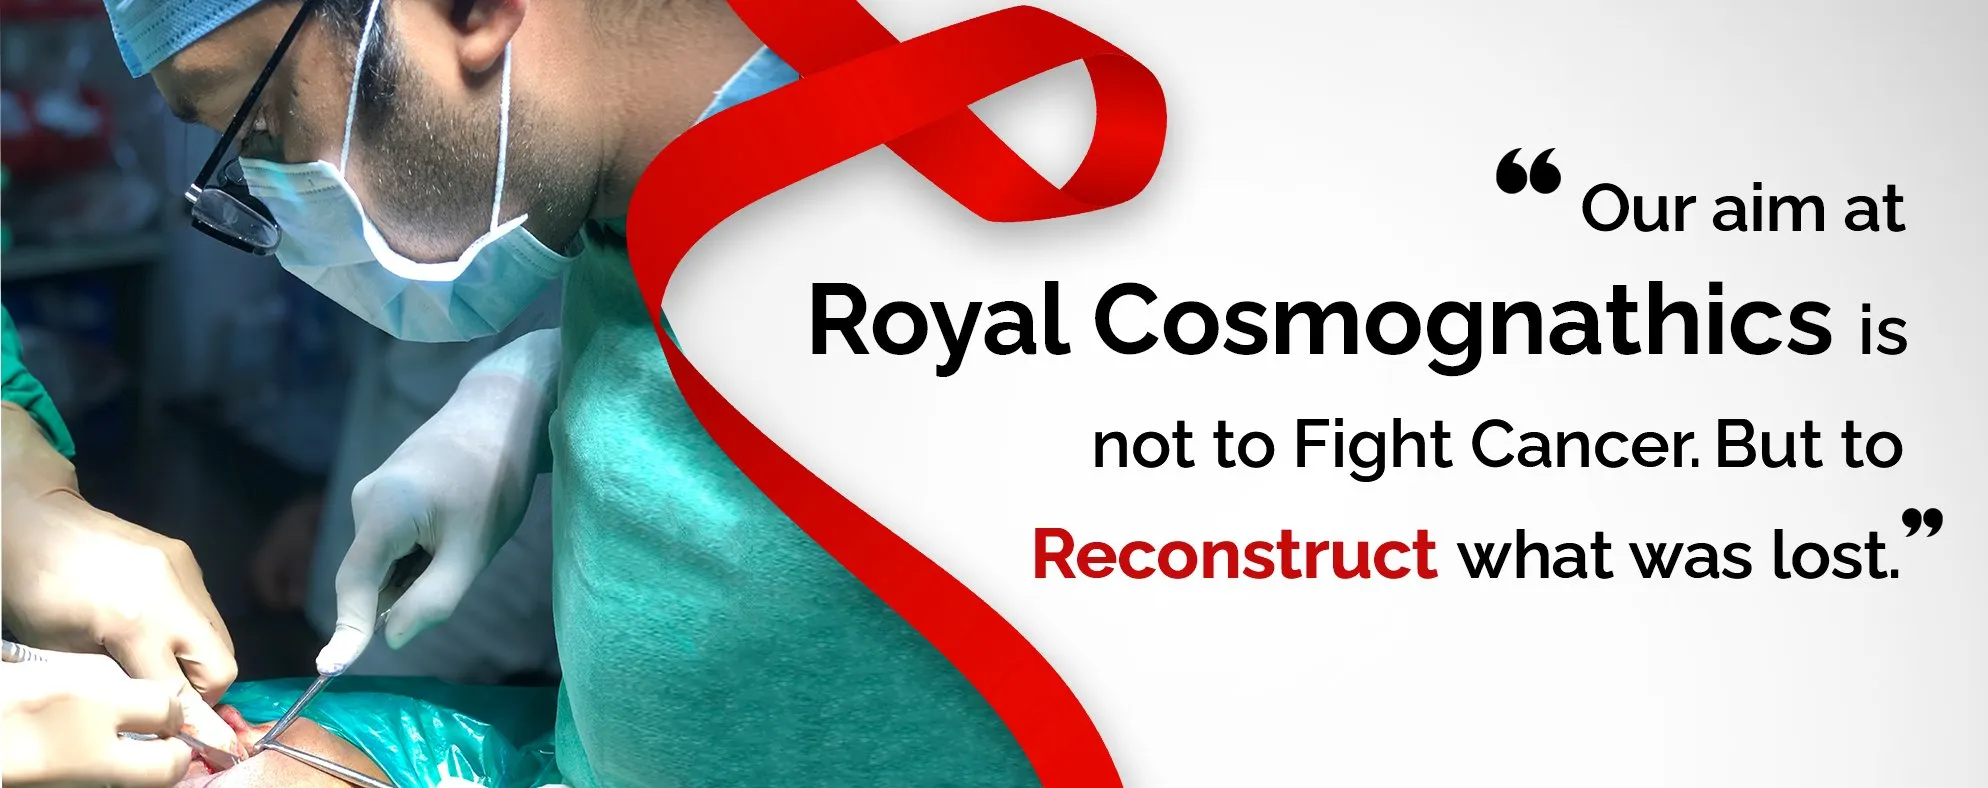 Royal Cosmognathics is not to Fight Cancer. But to Reconstruct what was lost